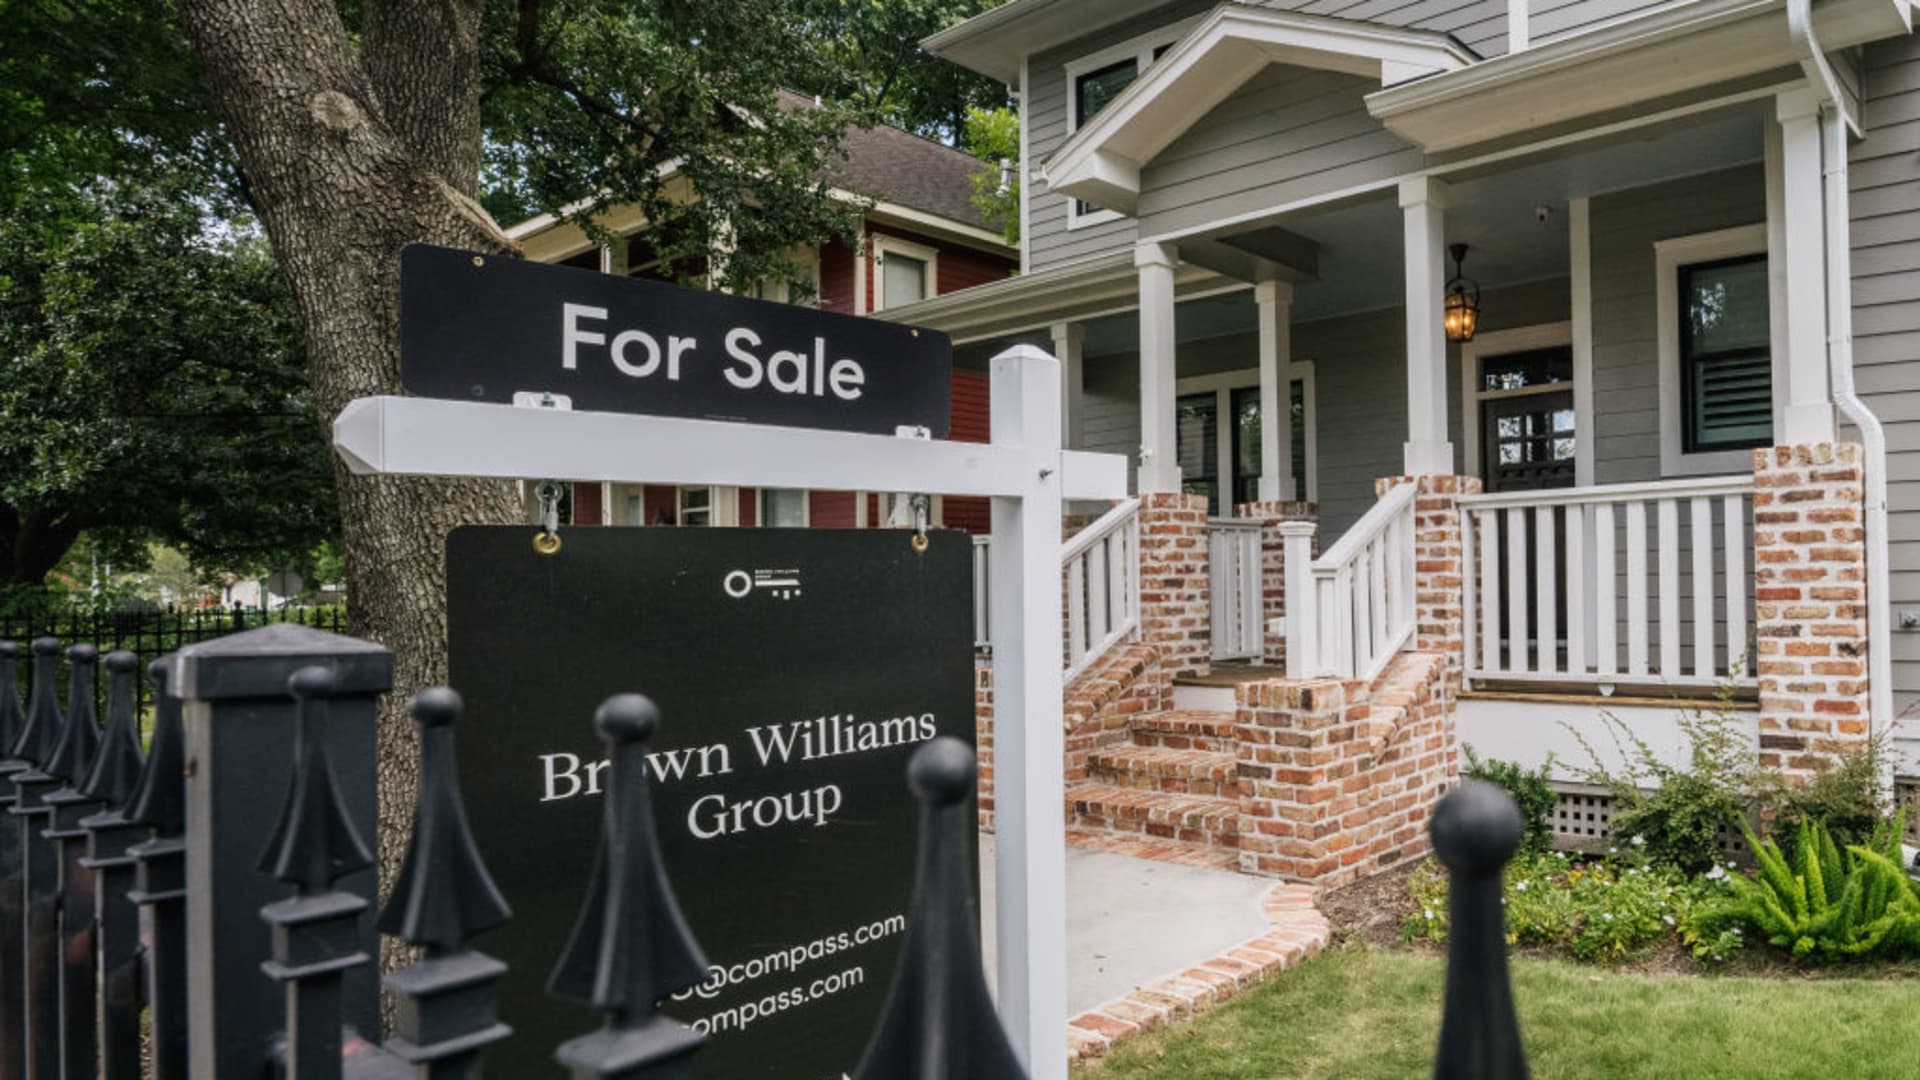 Mortgage rate soars closer to 5% in its second huge jump this week - CNBC